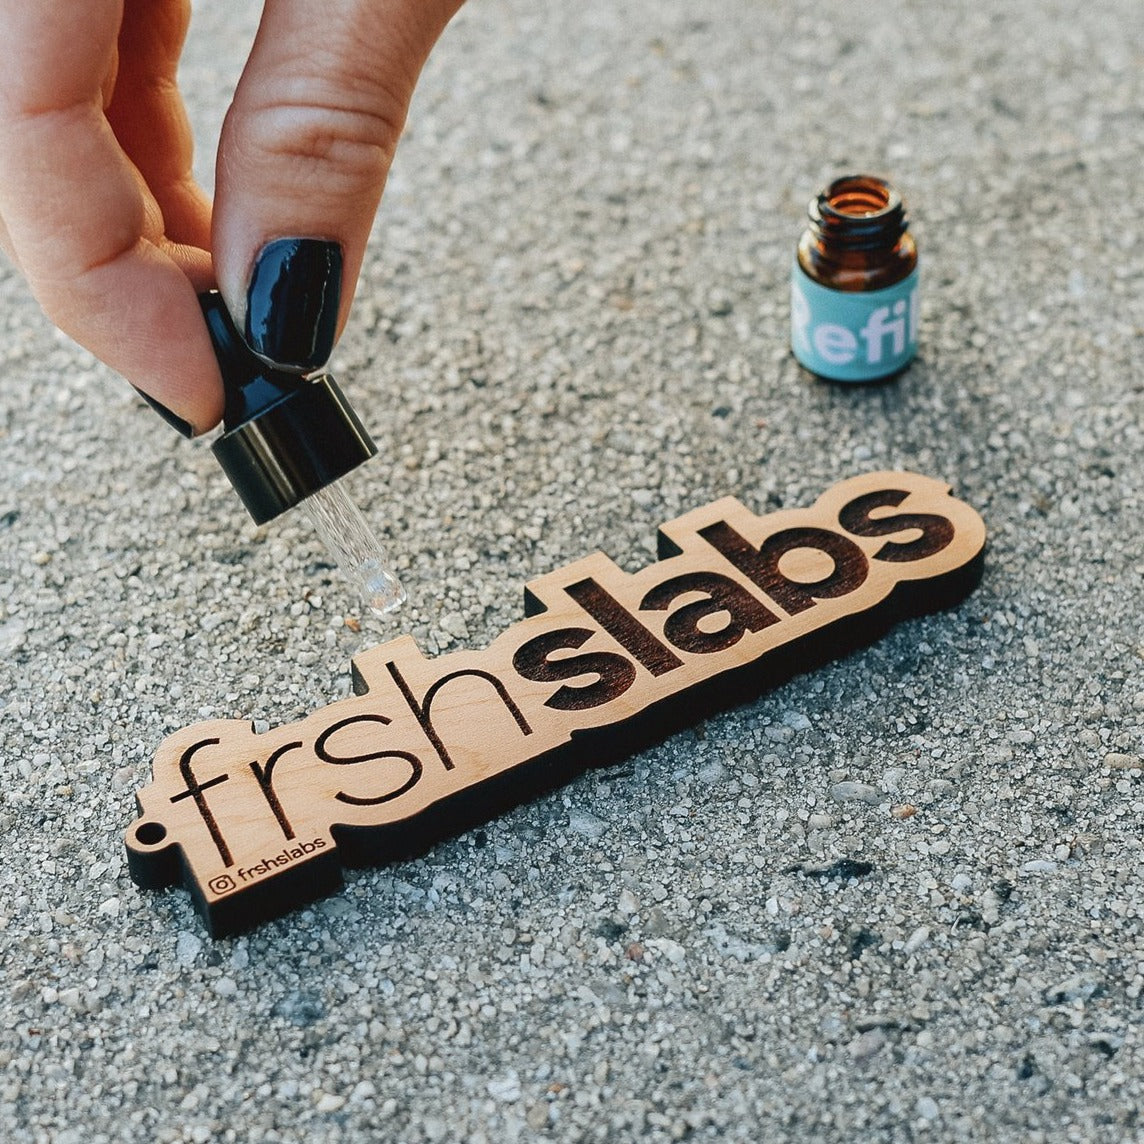 Frshslabs Re-Scentable Wooden Air Freshener | Scent Refill Only